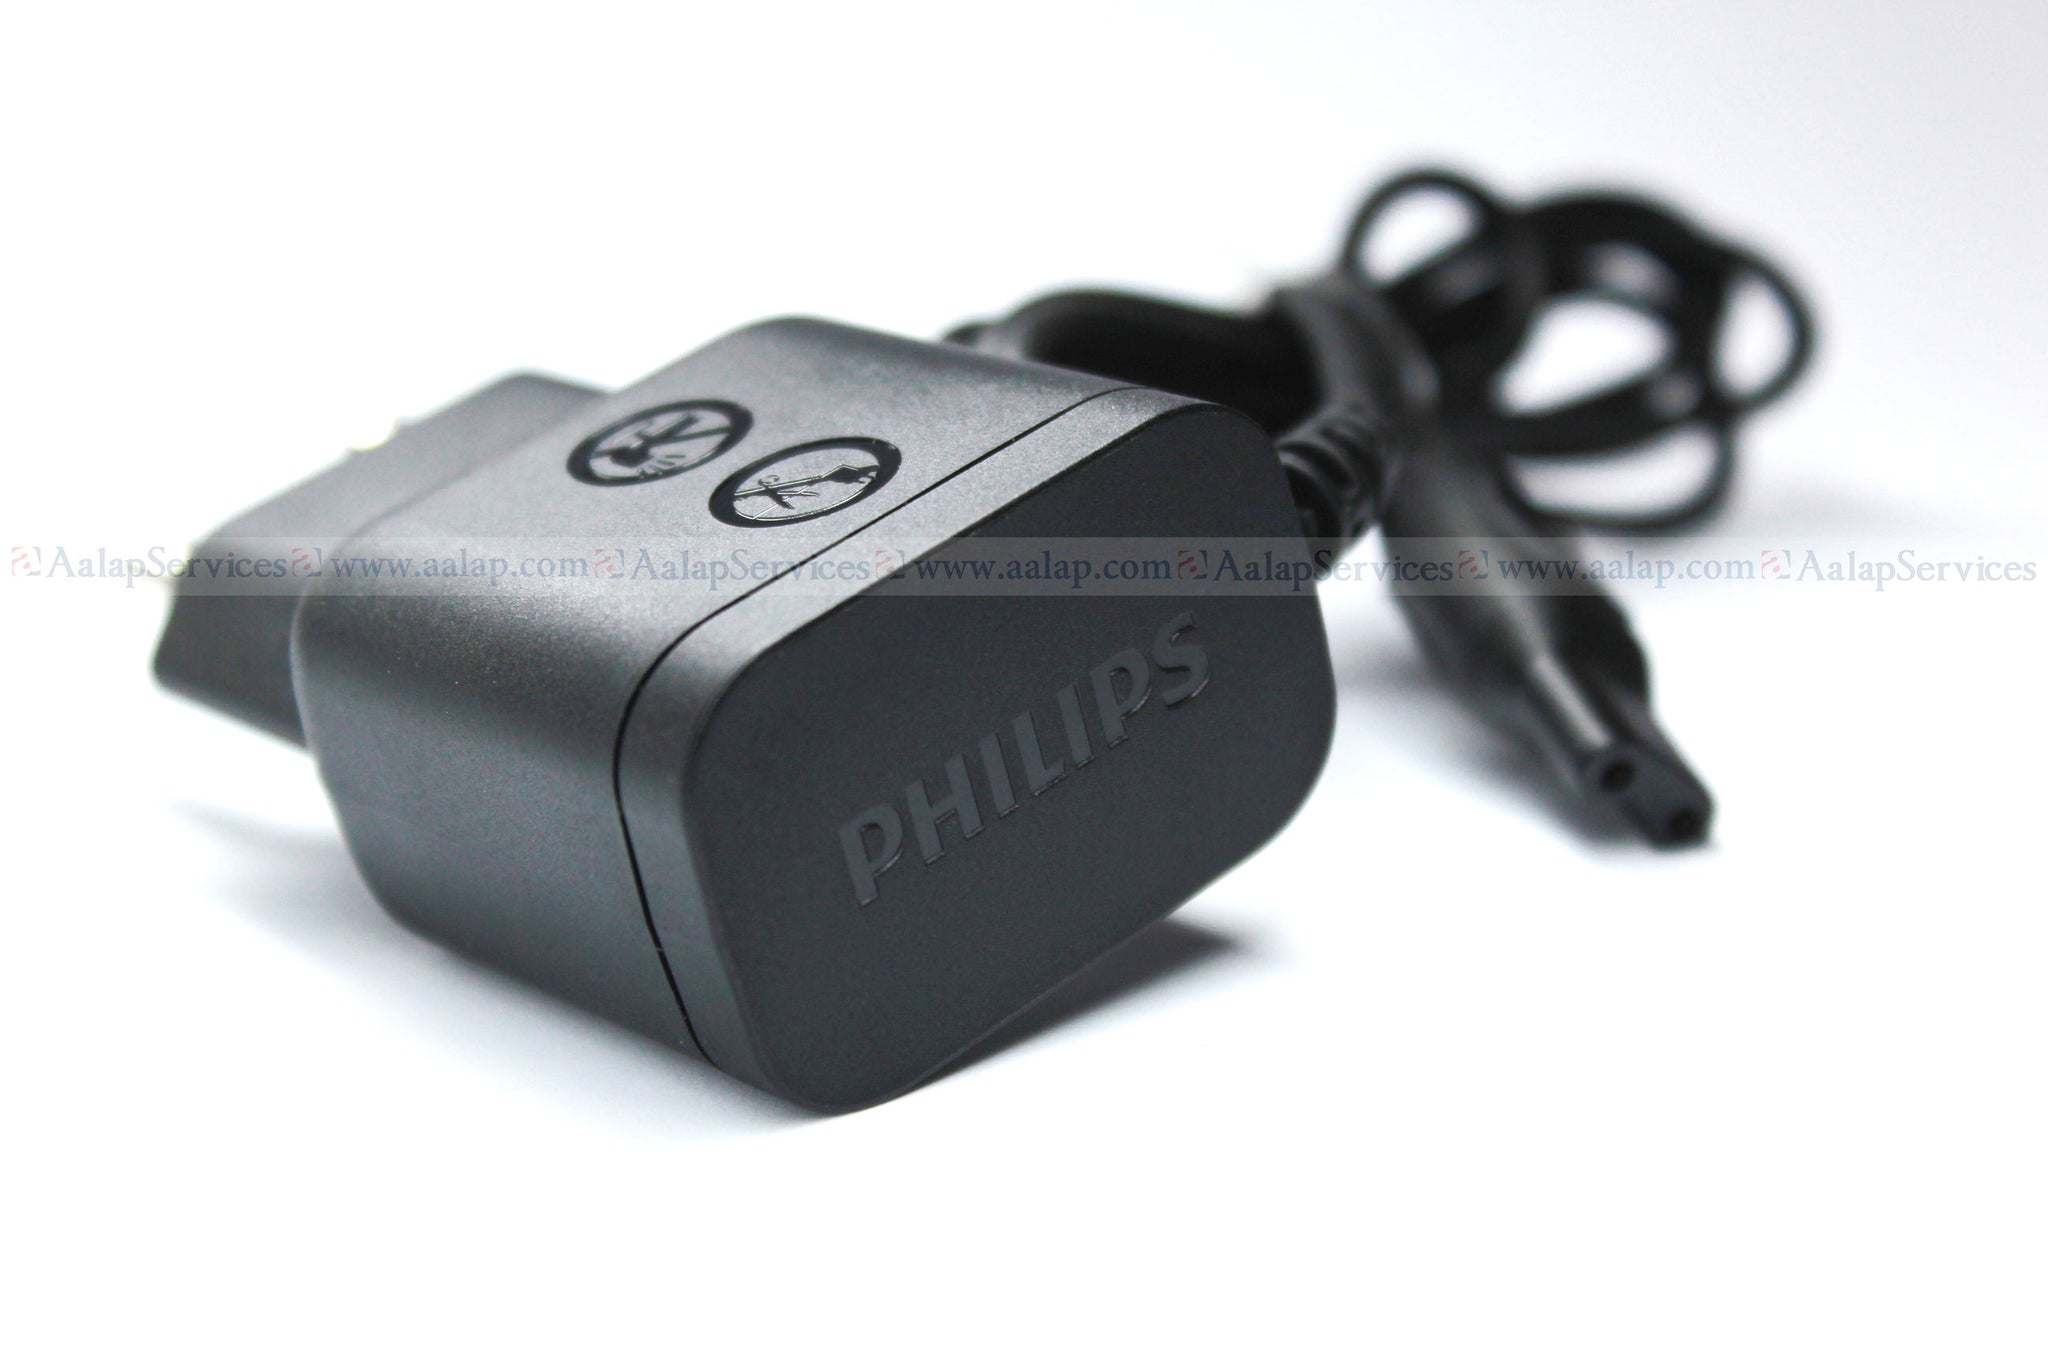 philips qg3322 charger